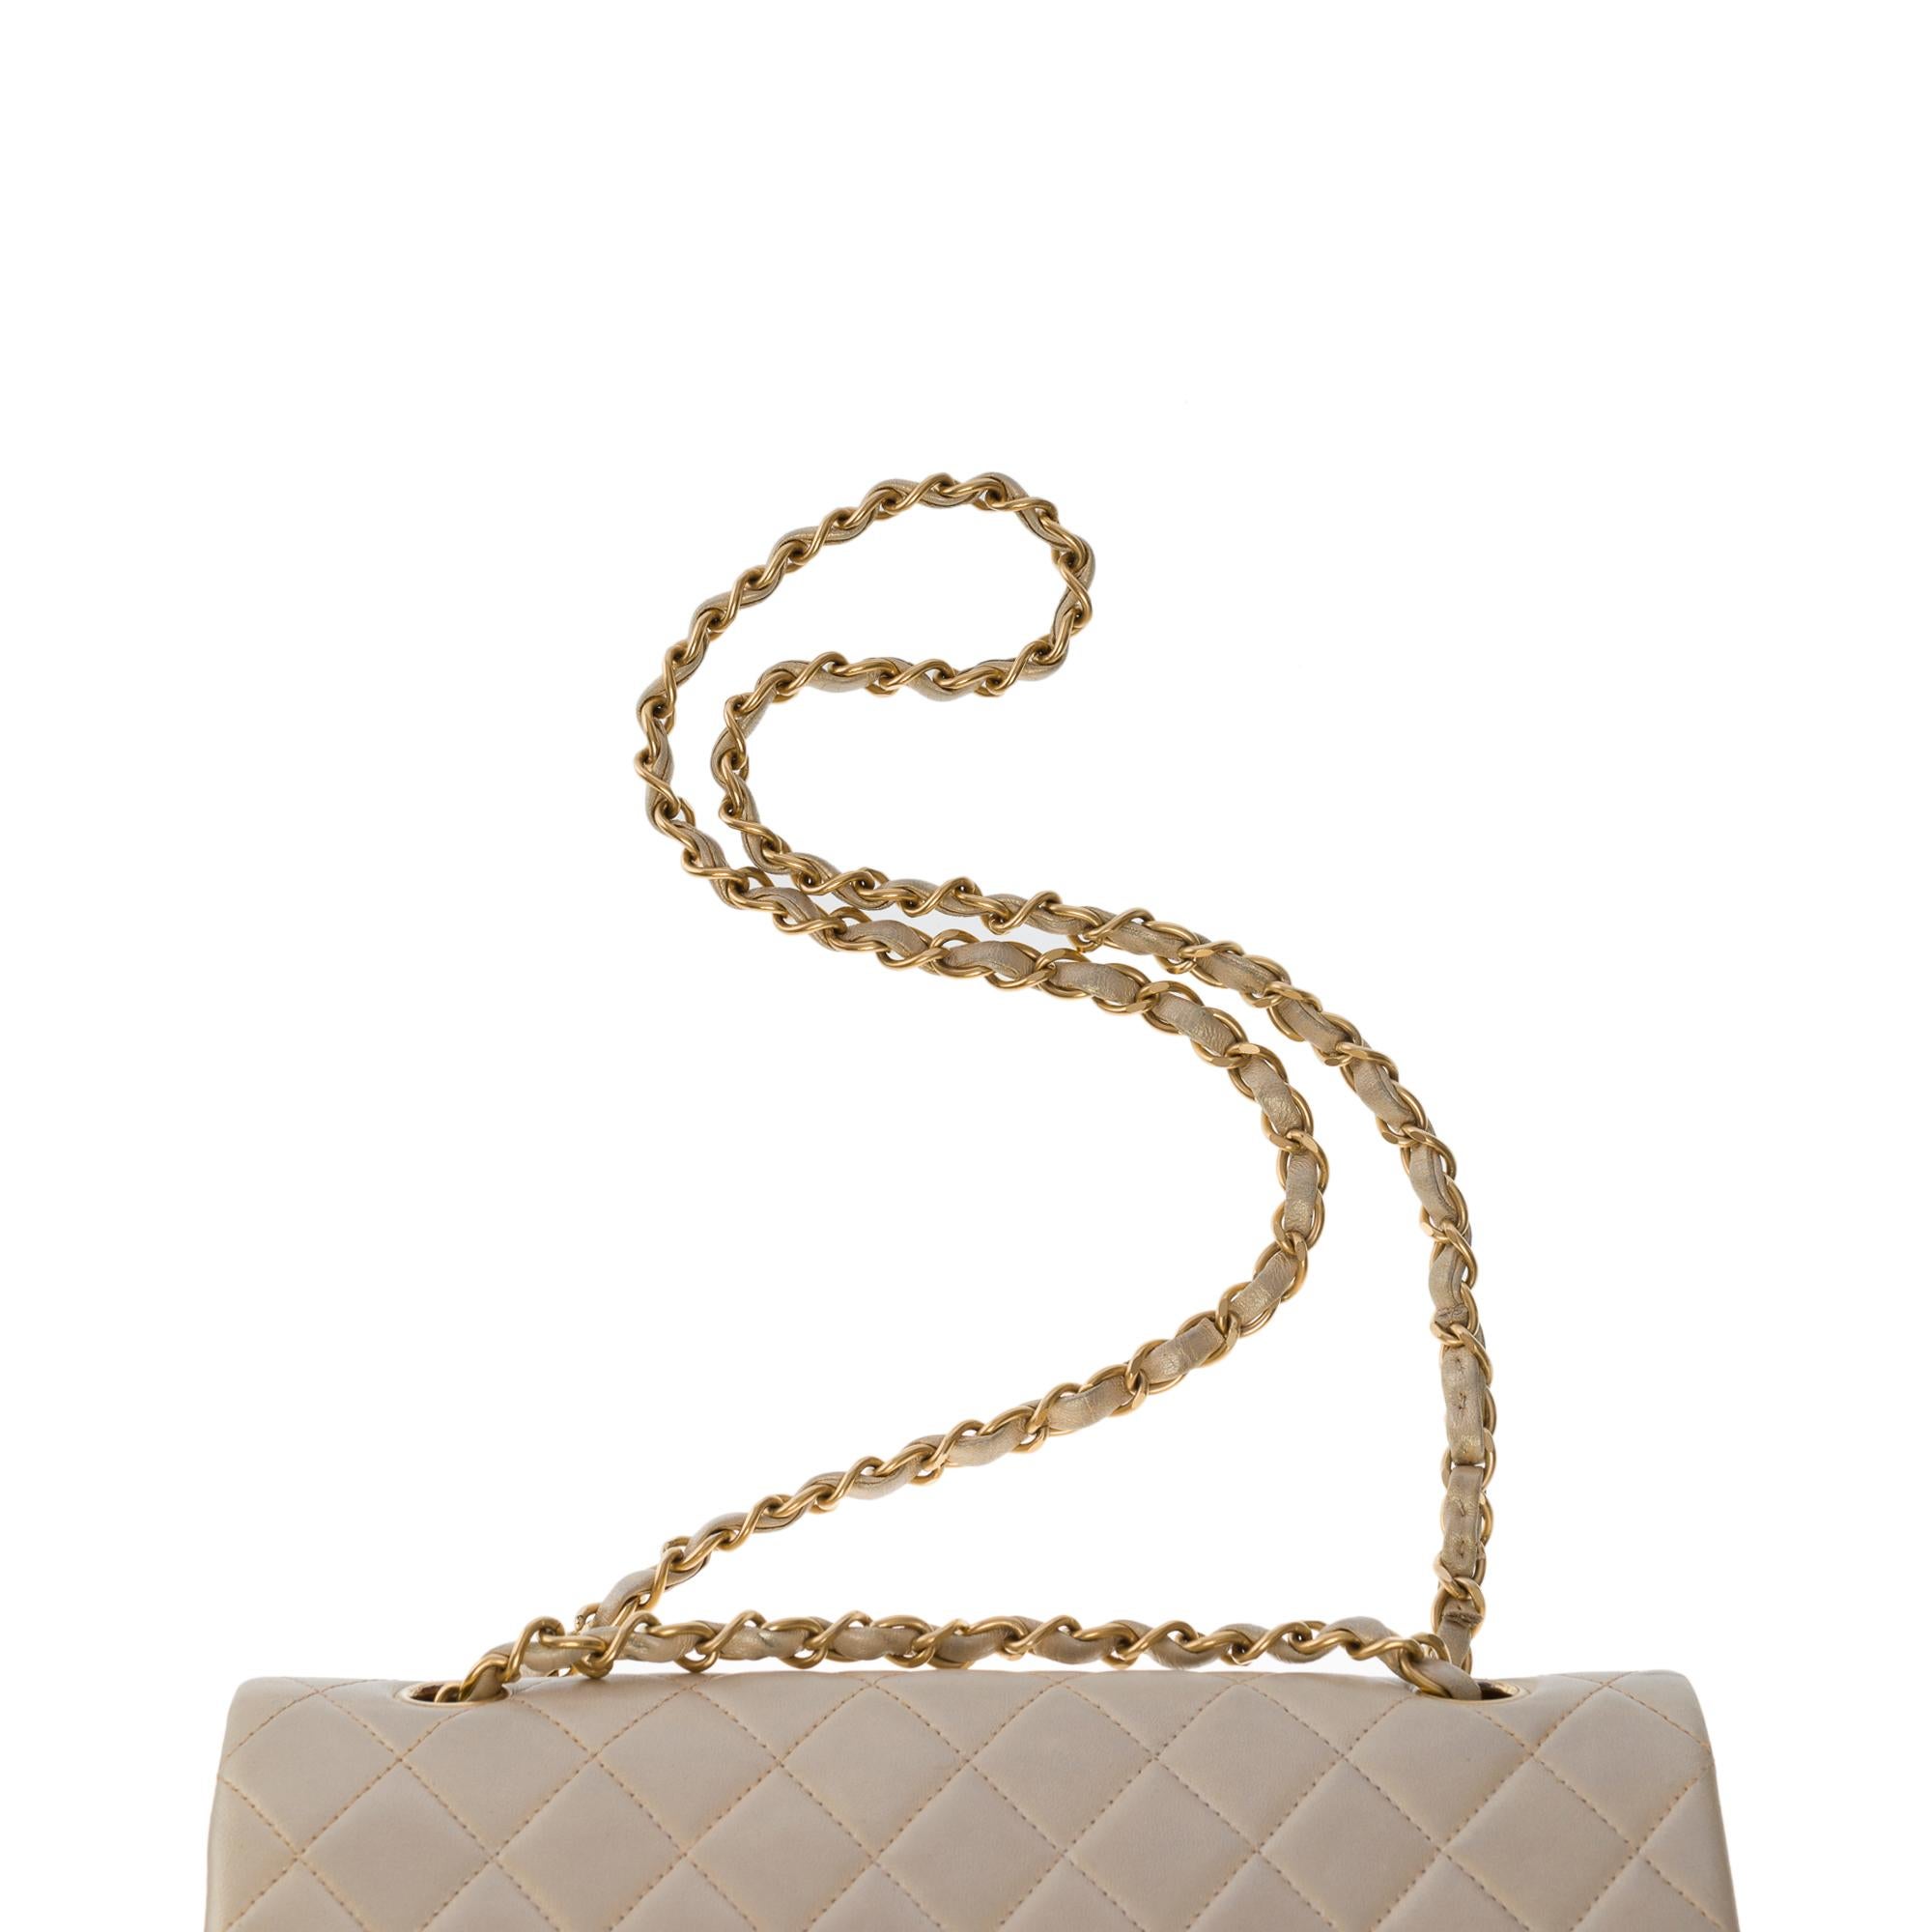 Chanel Timeless Medium double flap bag in iridescent gold quilted lambskin , GHW 5